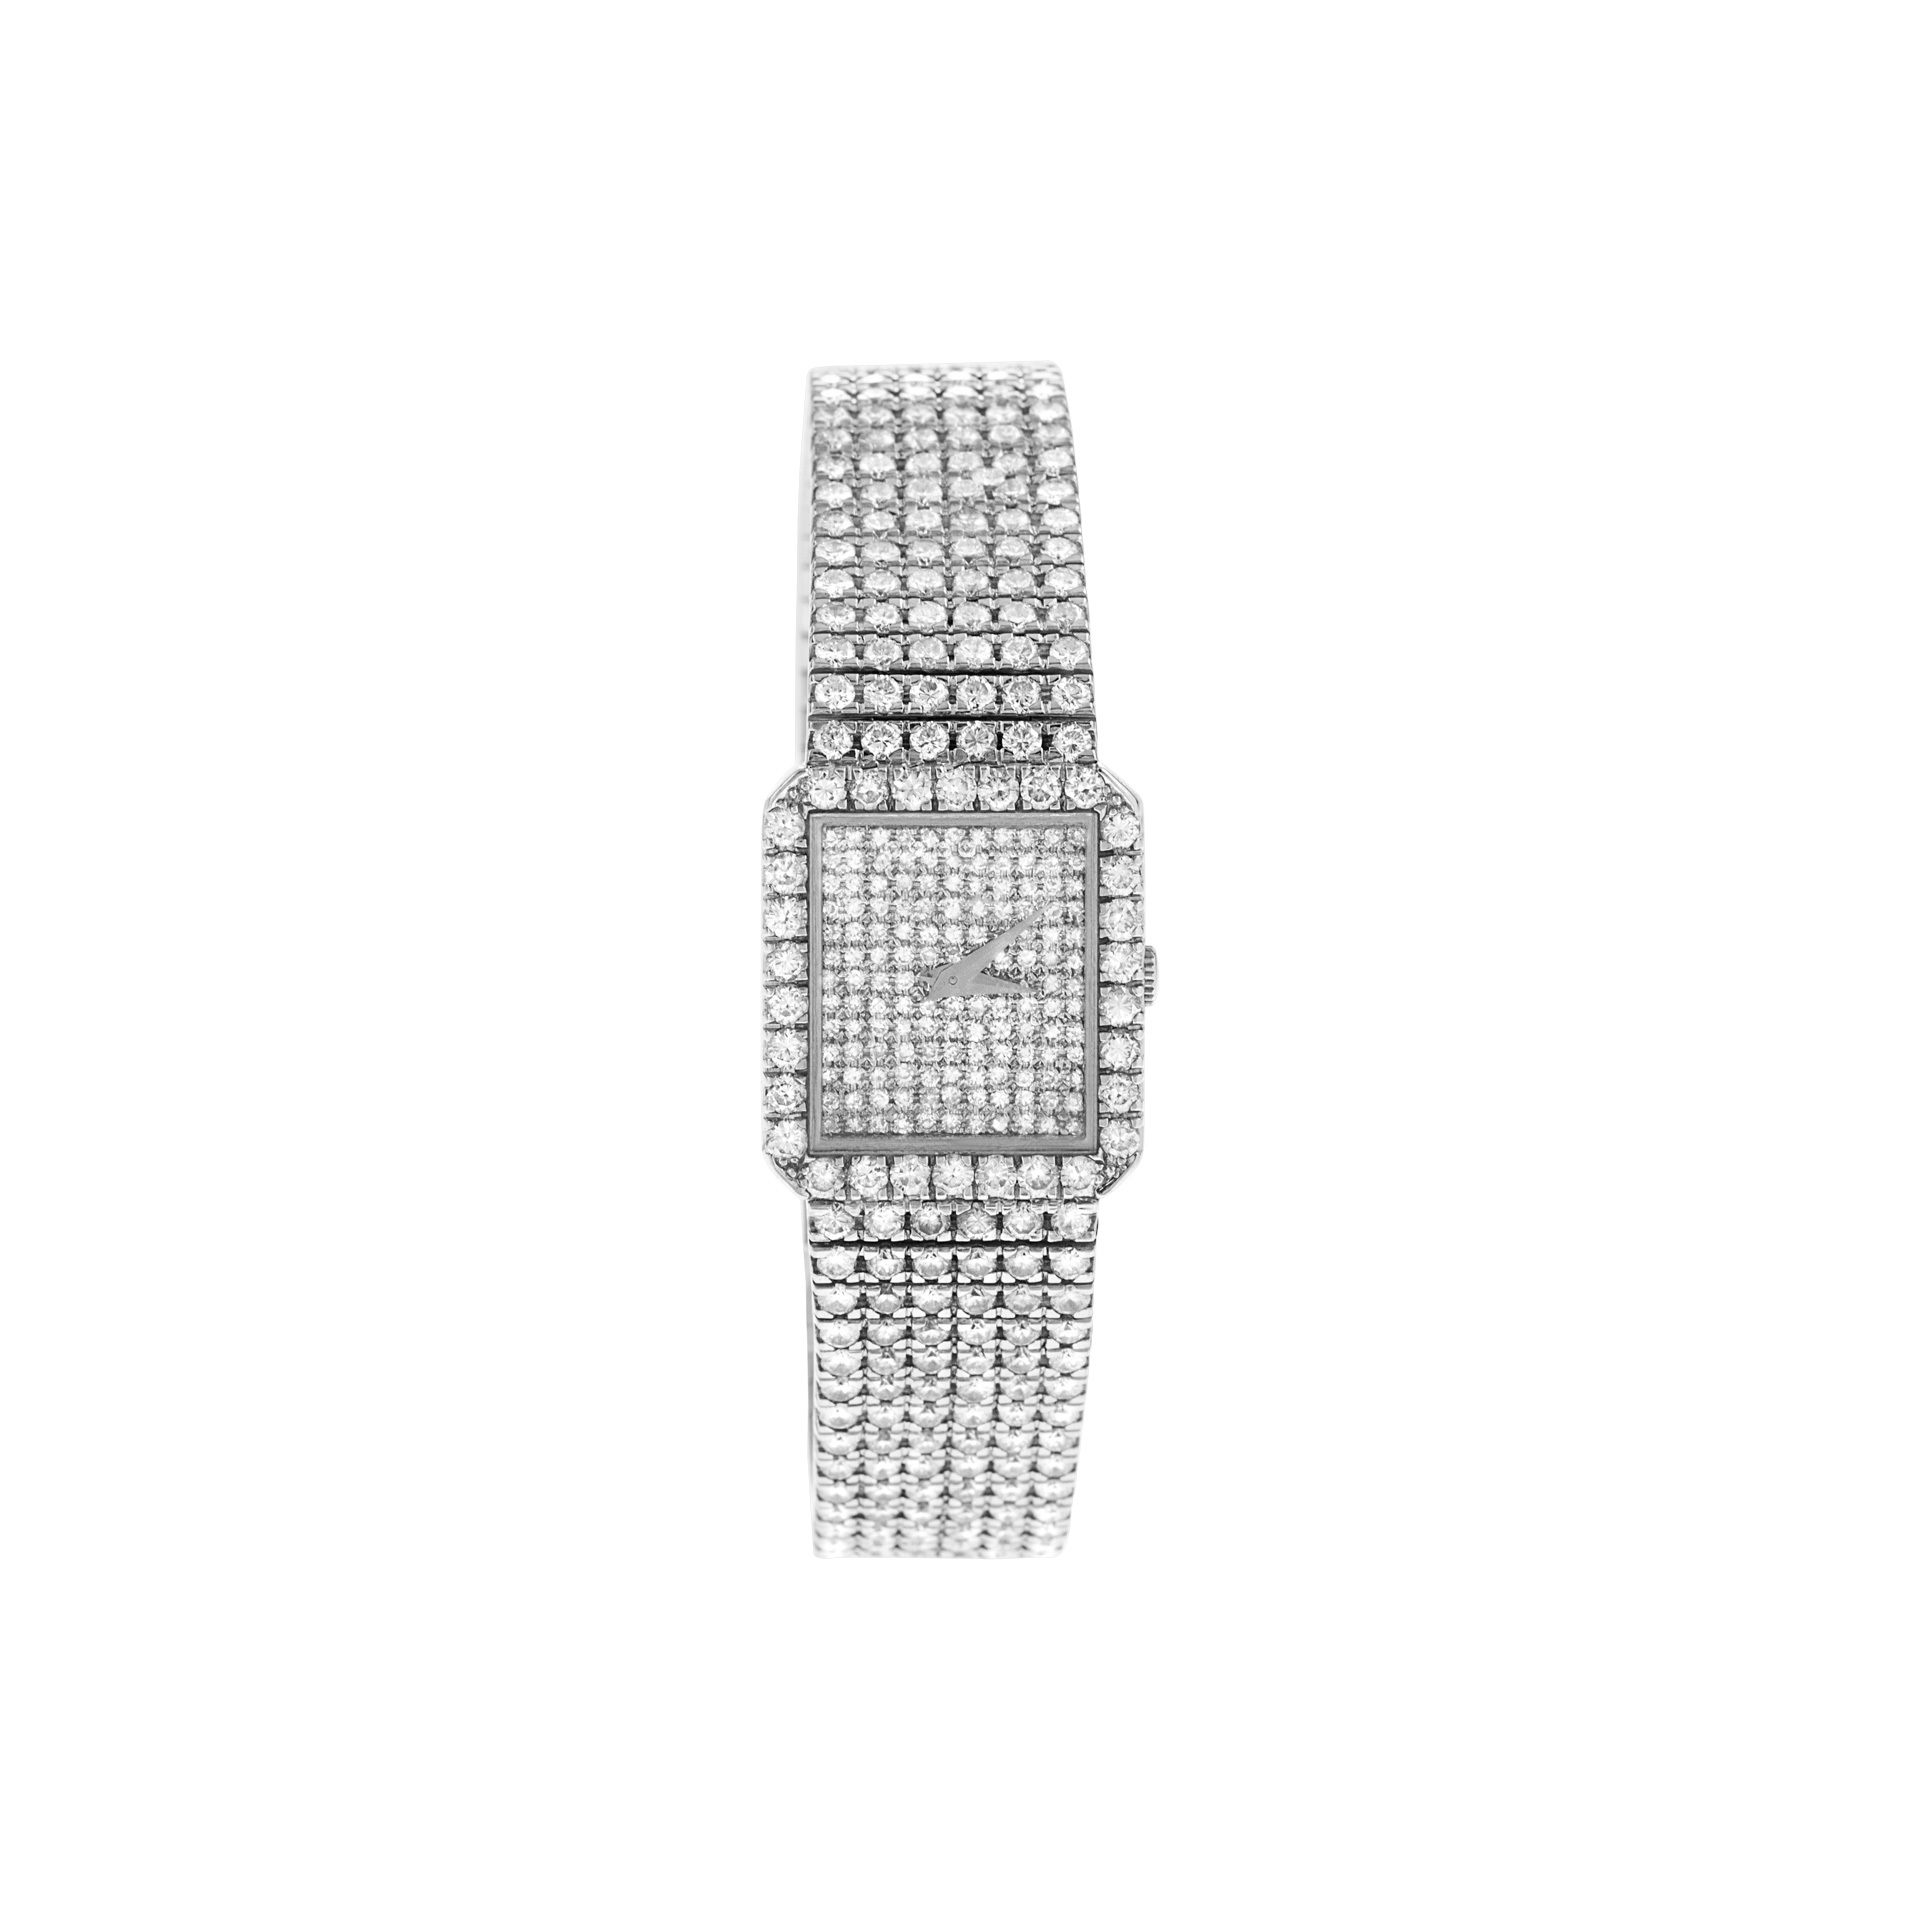 Piaget Classic 19.5mm 8354 image 1